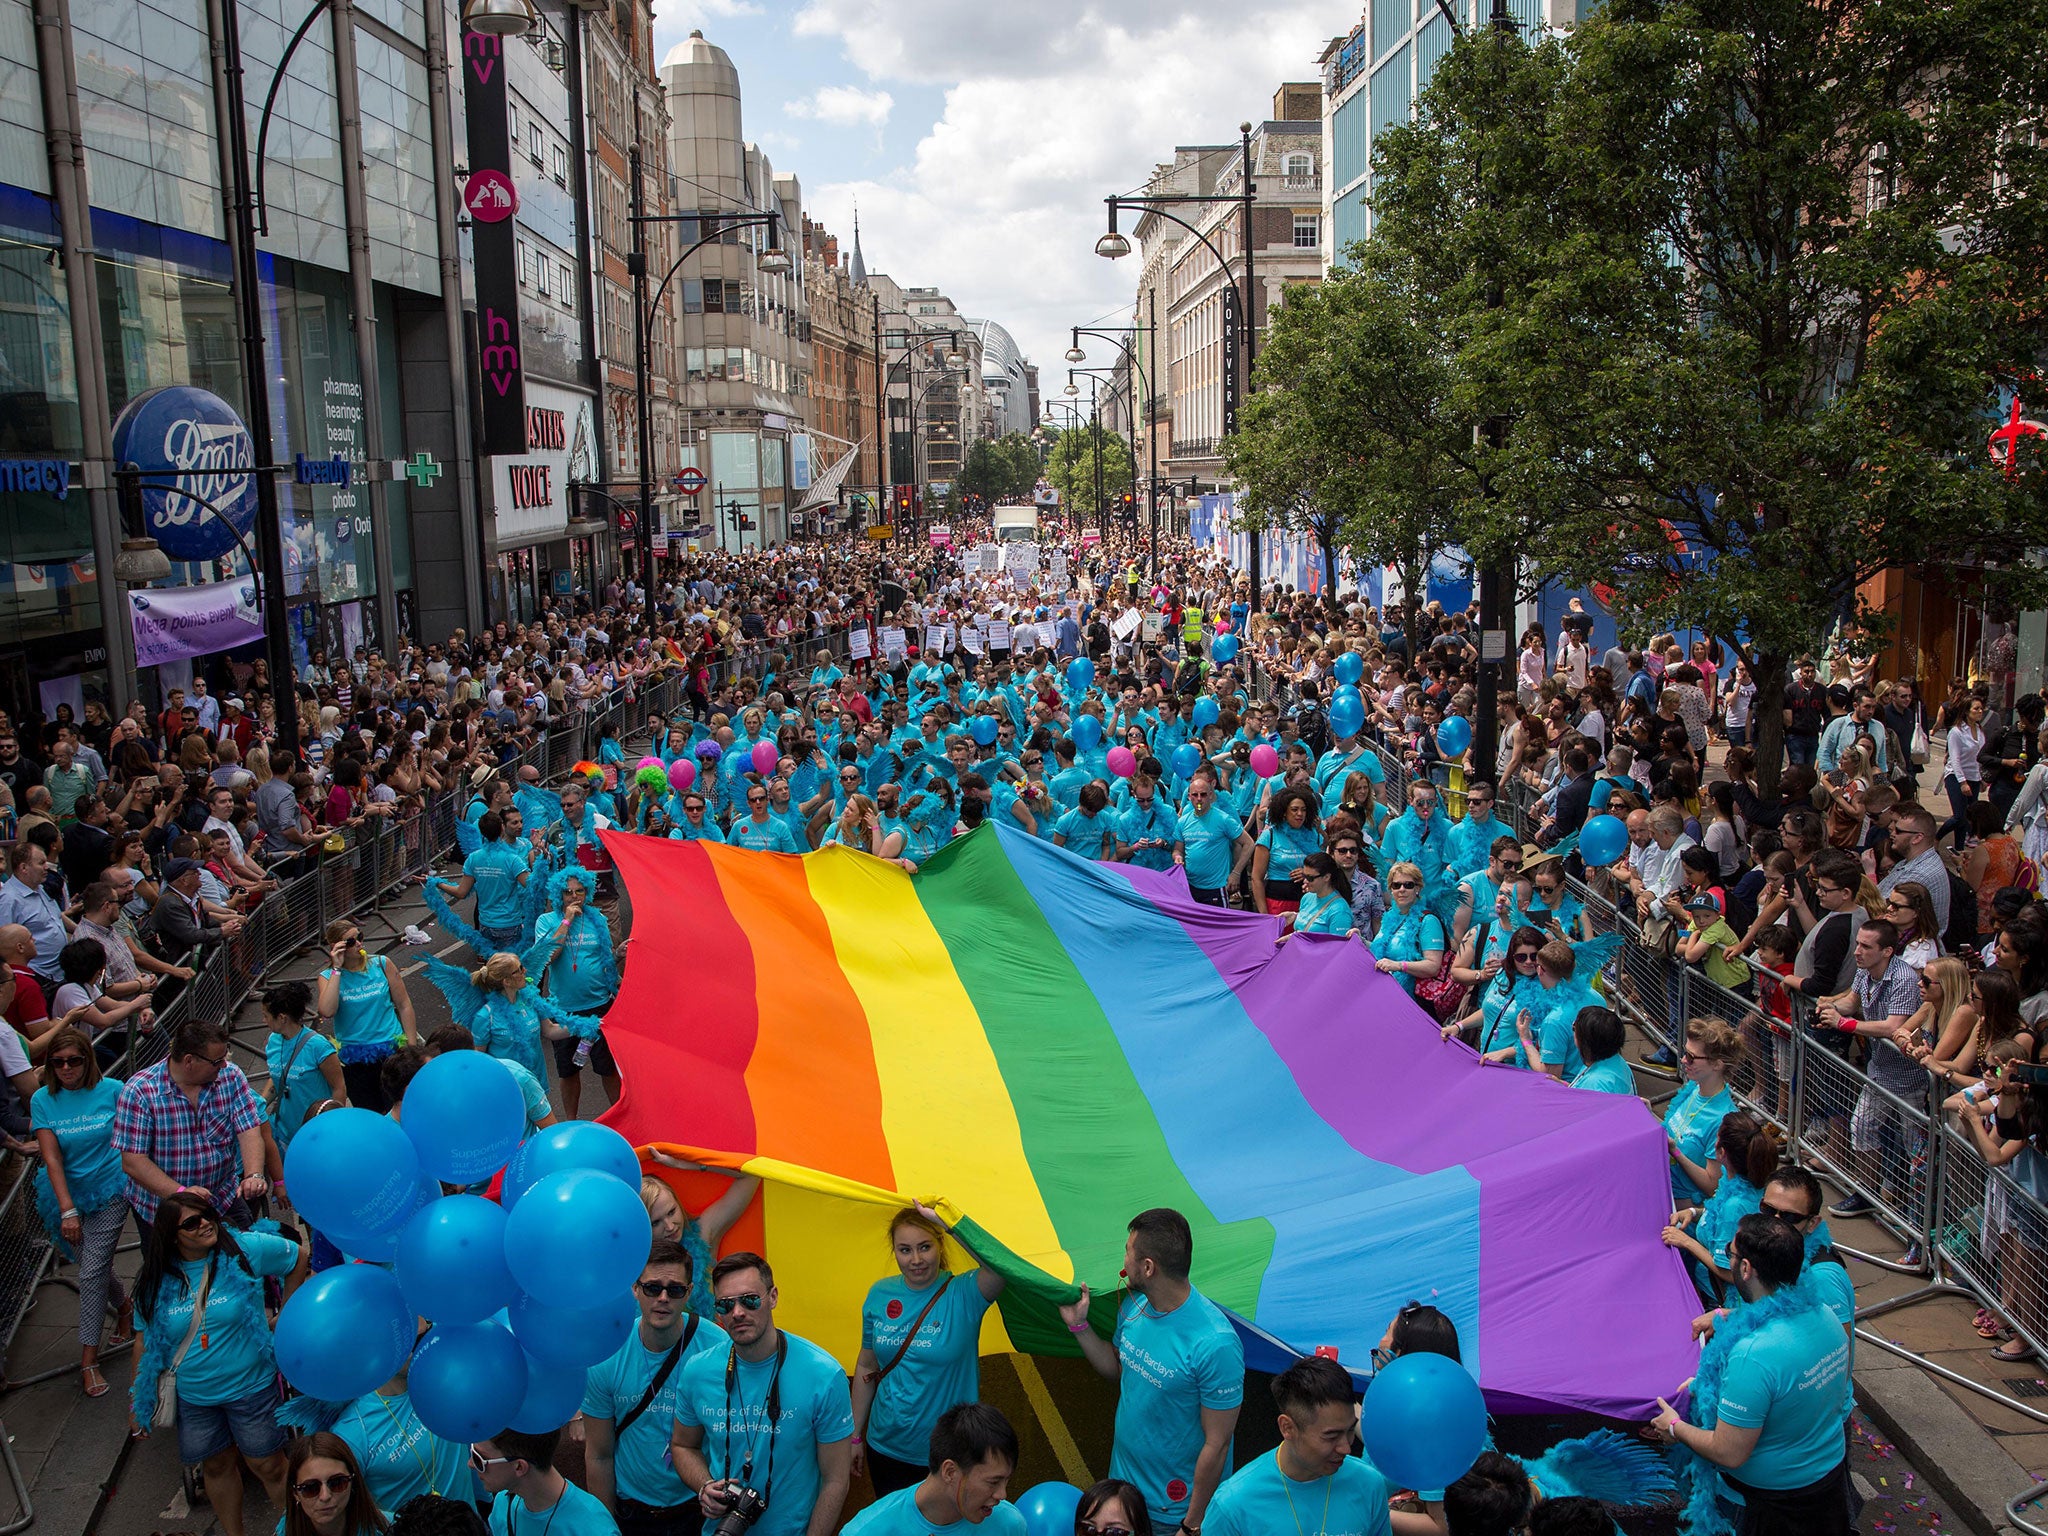 Cheerful crowd at the London Pride parade